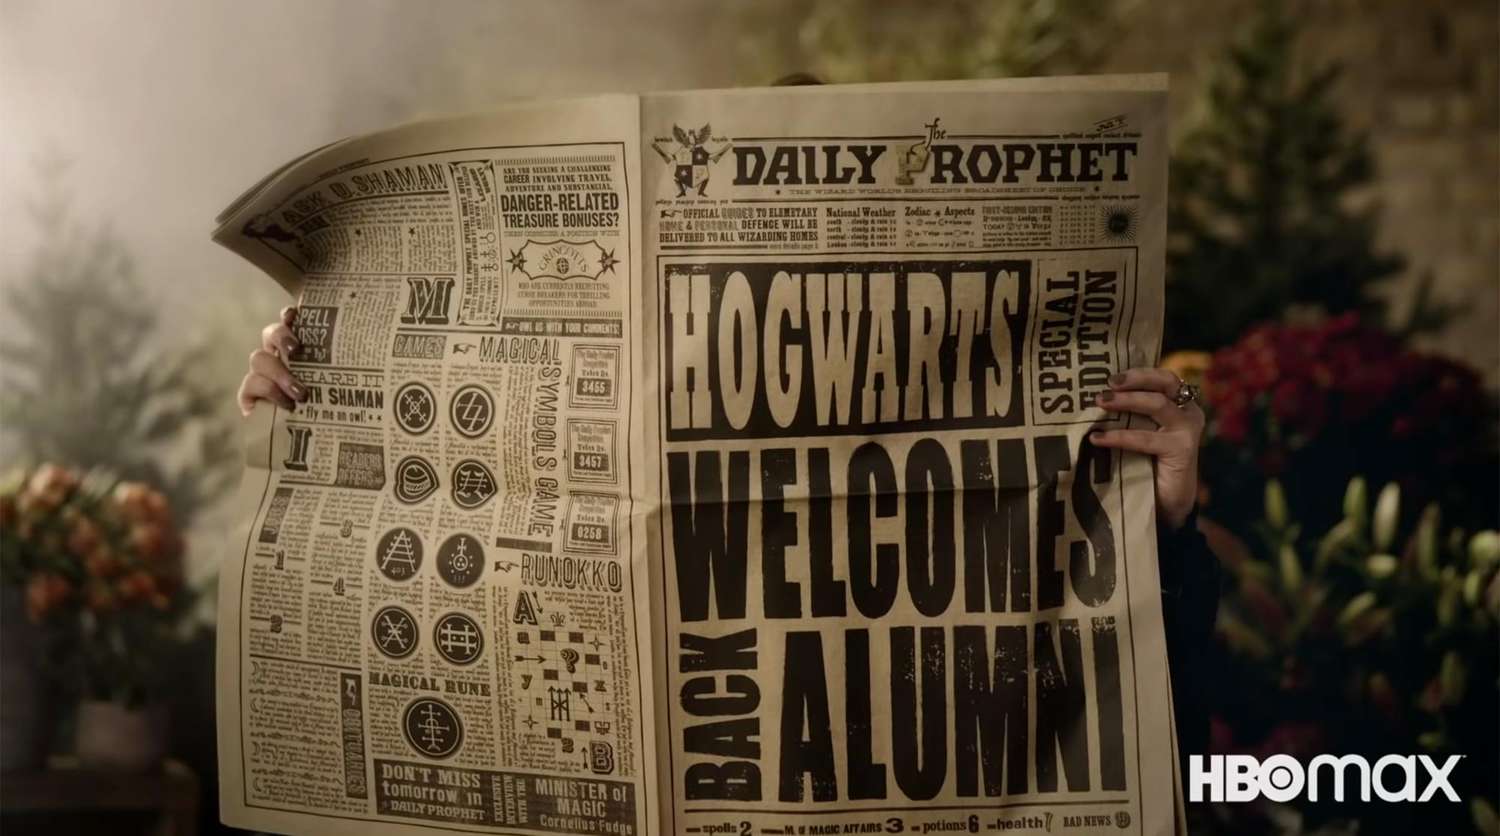 'Harry Potter' stars return in teaser for HBO Max's reunion special - Entertainment Weekly News